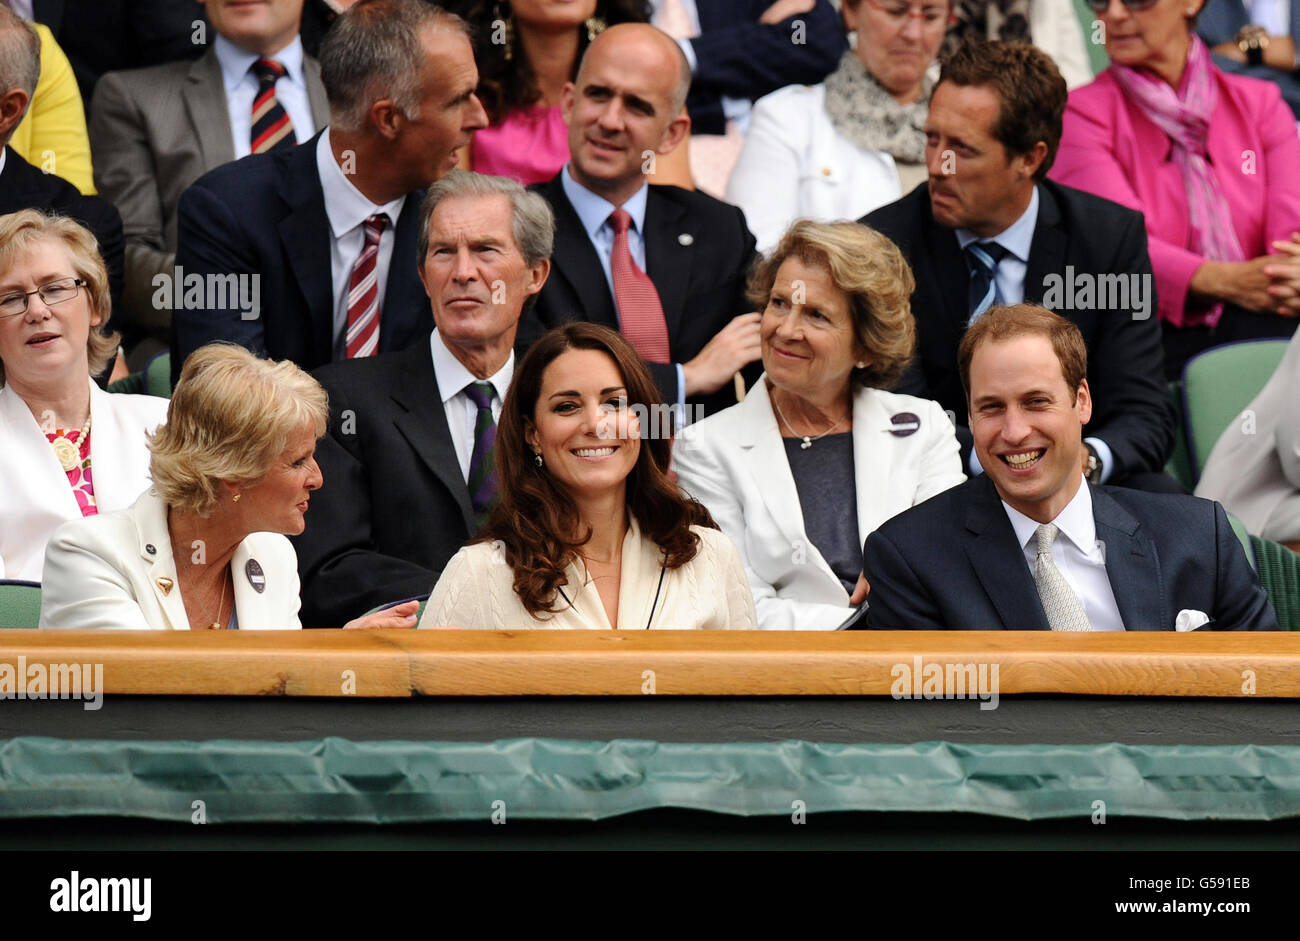 The Duke and Duchess of Cambridge in the Royal Box during day nine of the 2012 Wimbledon Championships at the All England Lawn Tennis Club, Wimbledon. Stock Photo